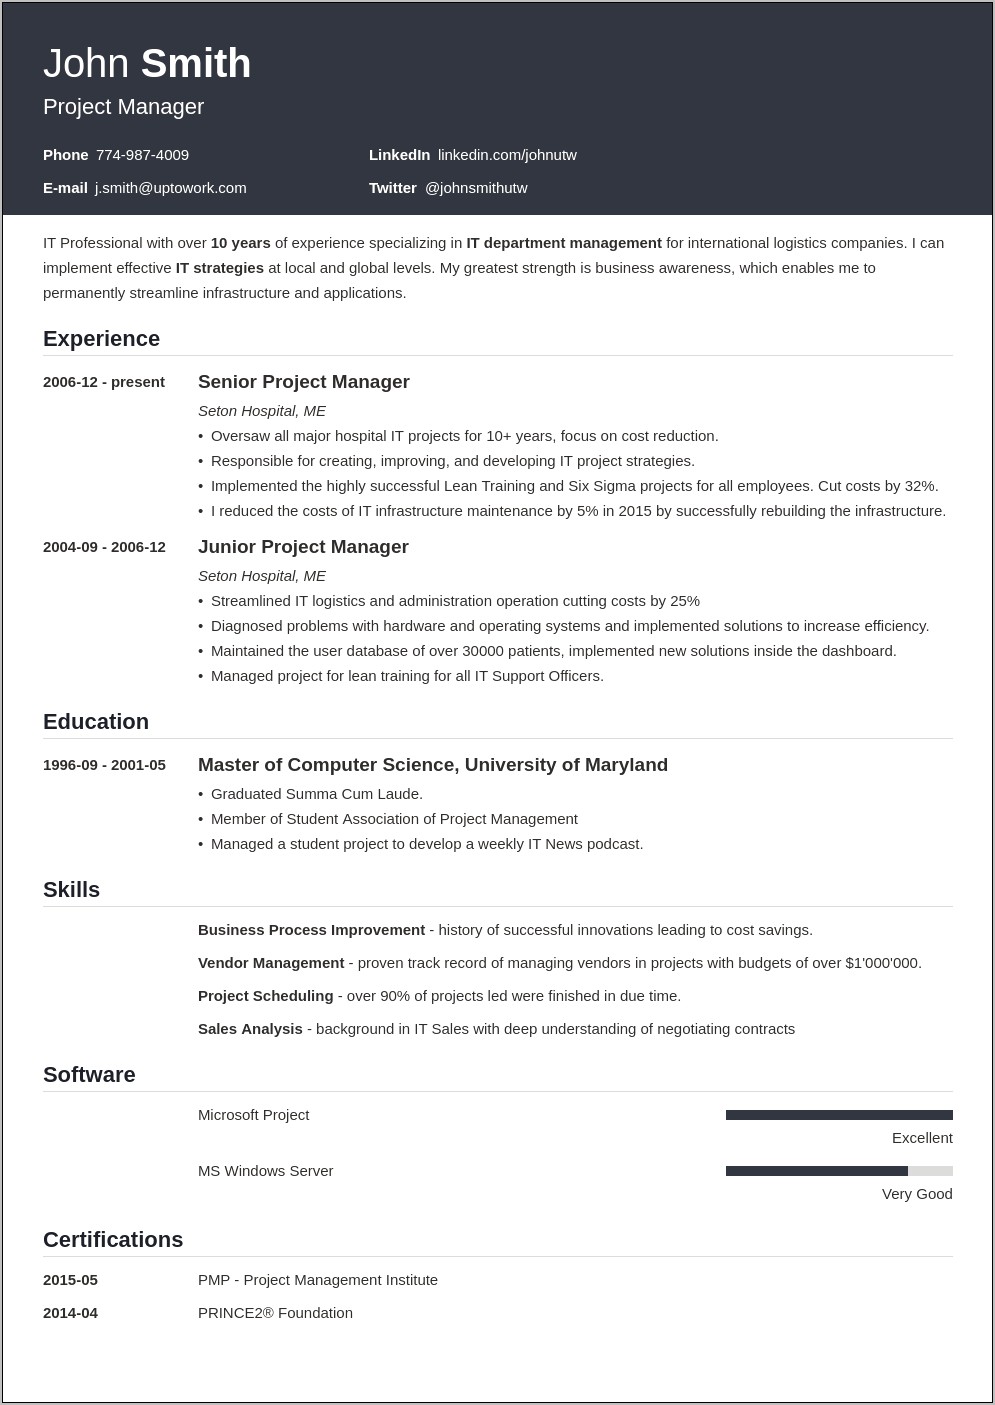 sample-resume-that-i-can-copy-and-paste-resume-example-gallery